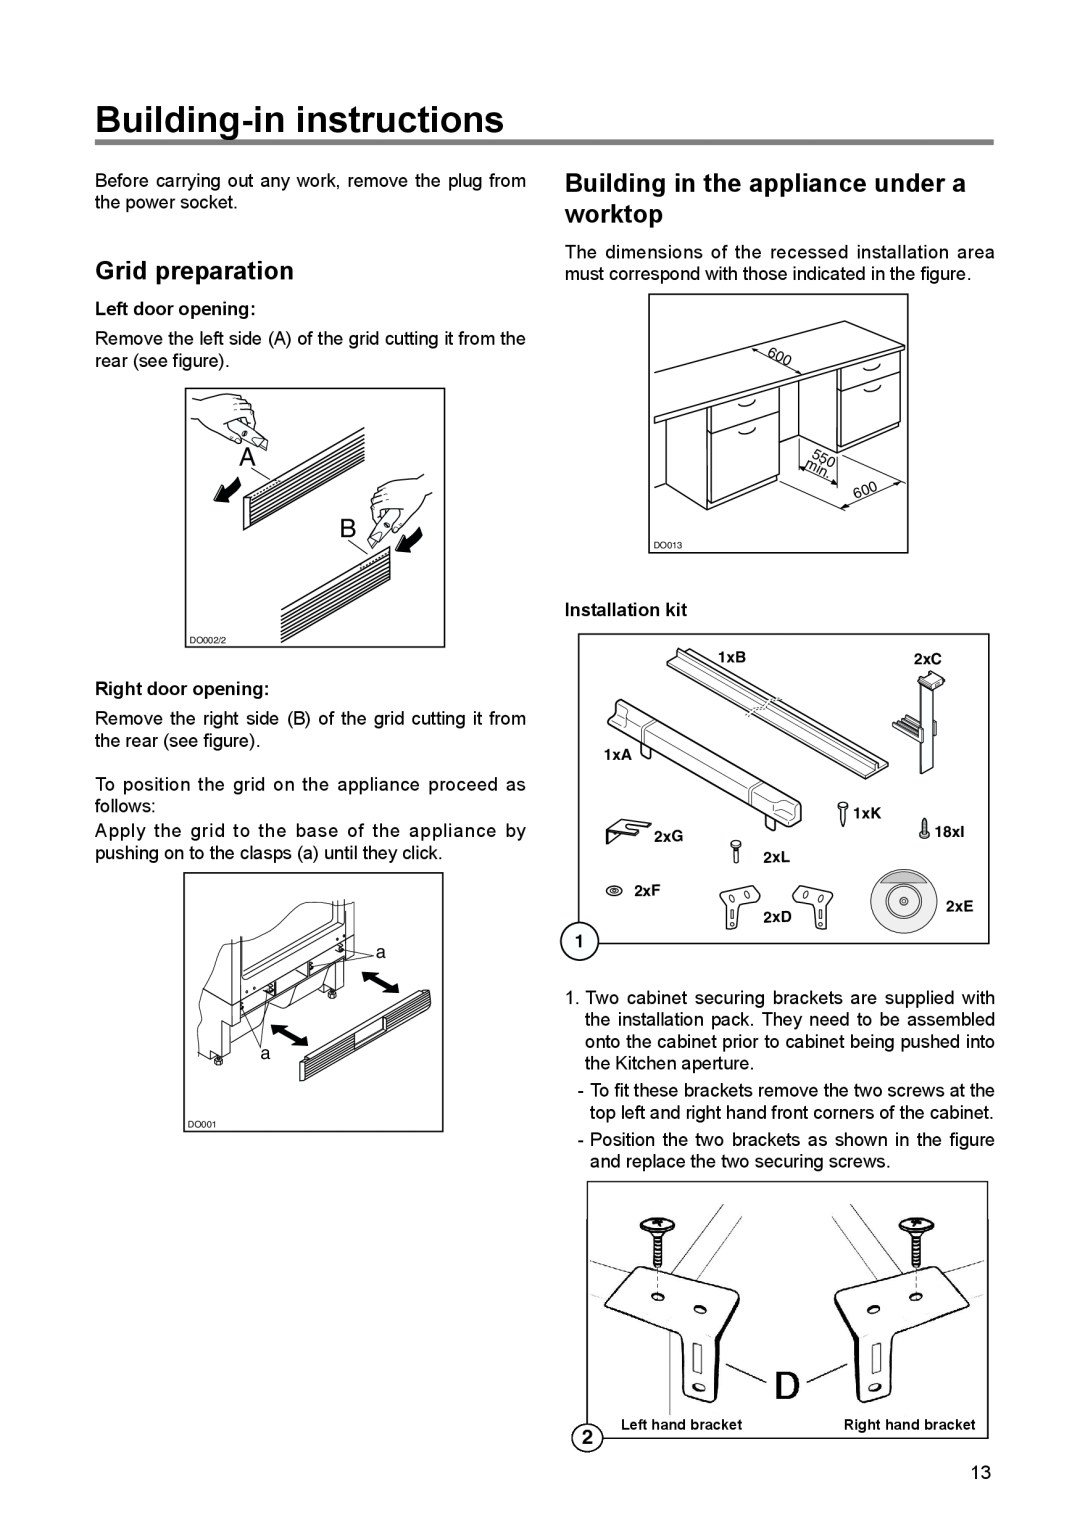 Tricity Bendix TBUL 140 Building-in instructions, Grid preparation, Building in the appliance under a worktop 